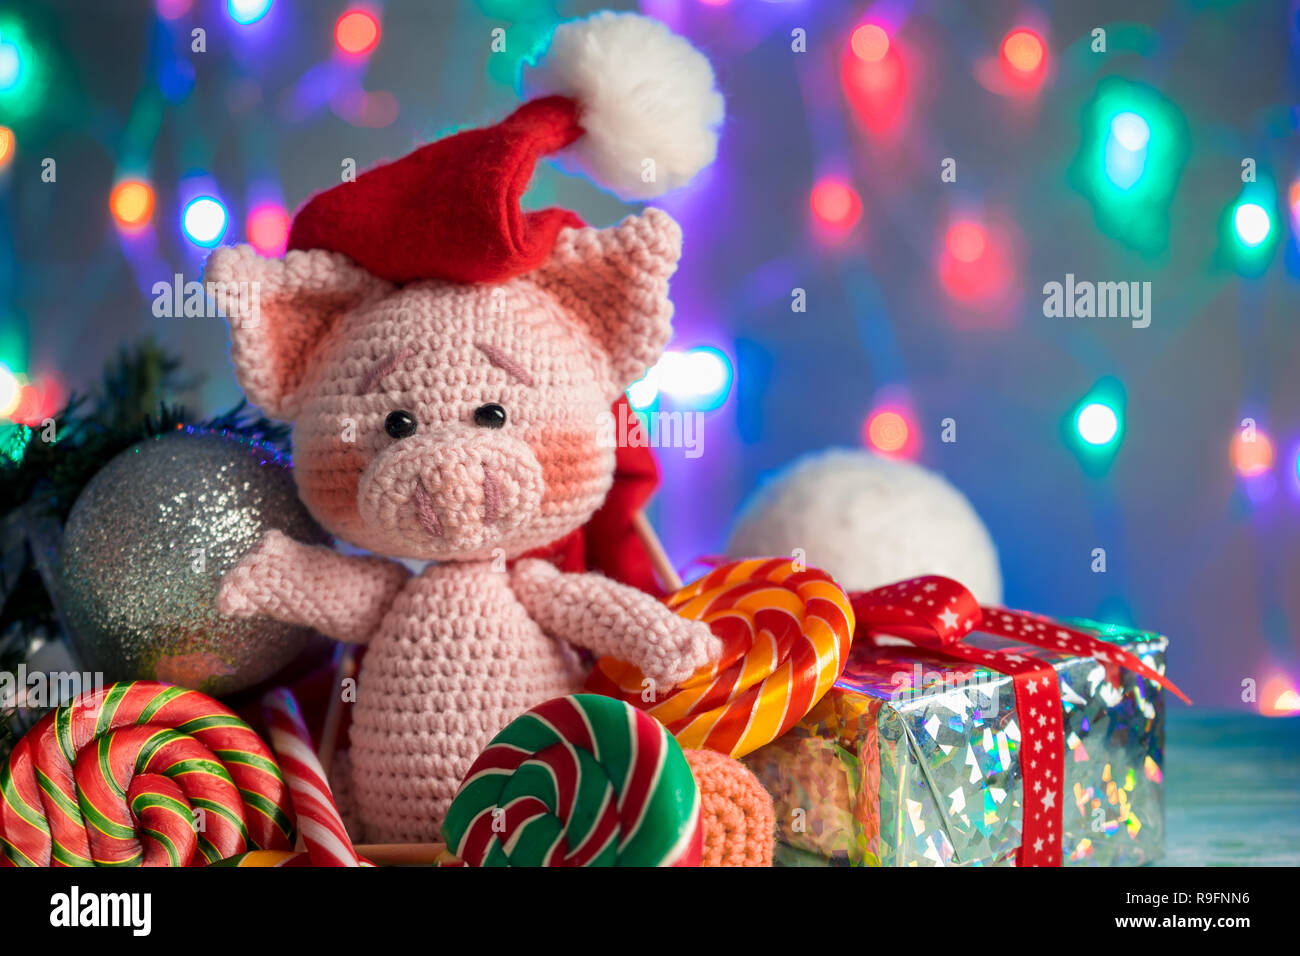 Funny greeting card with new year 2019. Pink pig with lollipops closeup on background with illumination. Stock Photo